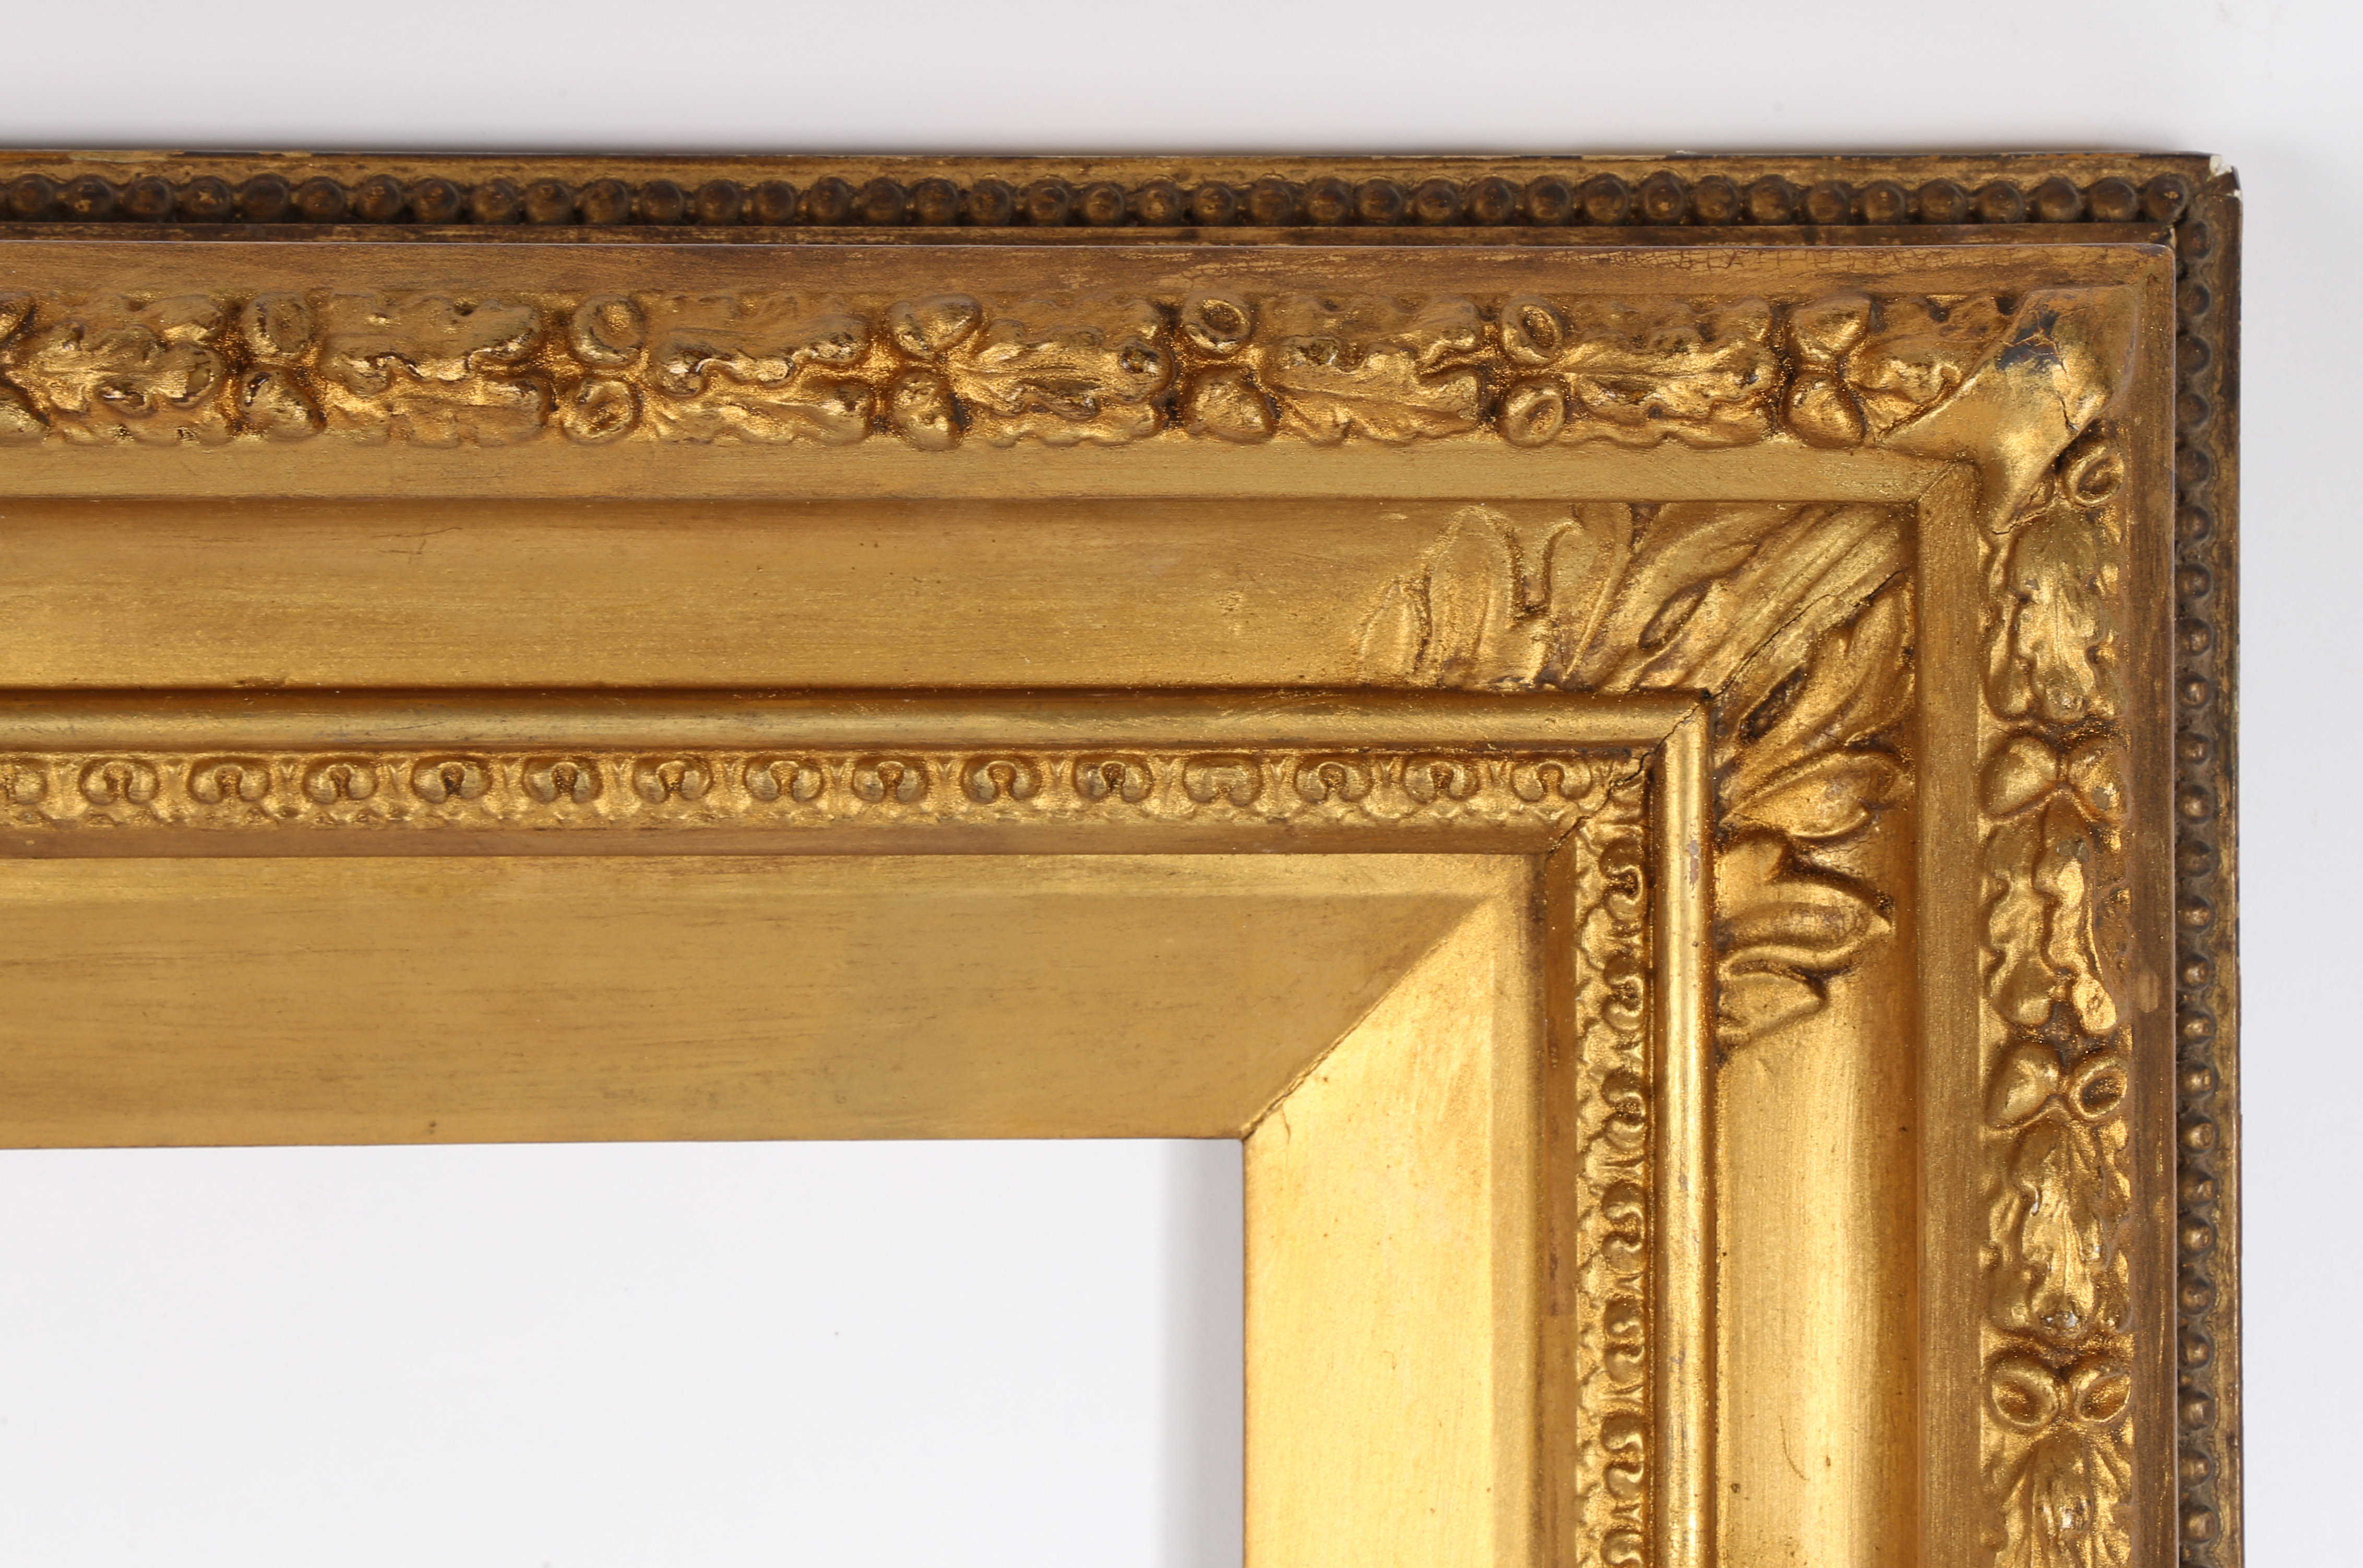 19th century straight picture frame with acanthus leaf corners - rebate size  10in x 8in - Image 4 of 9